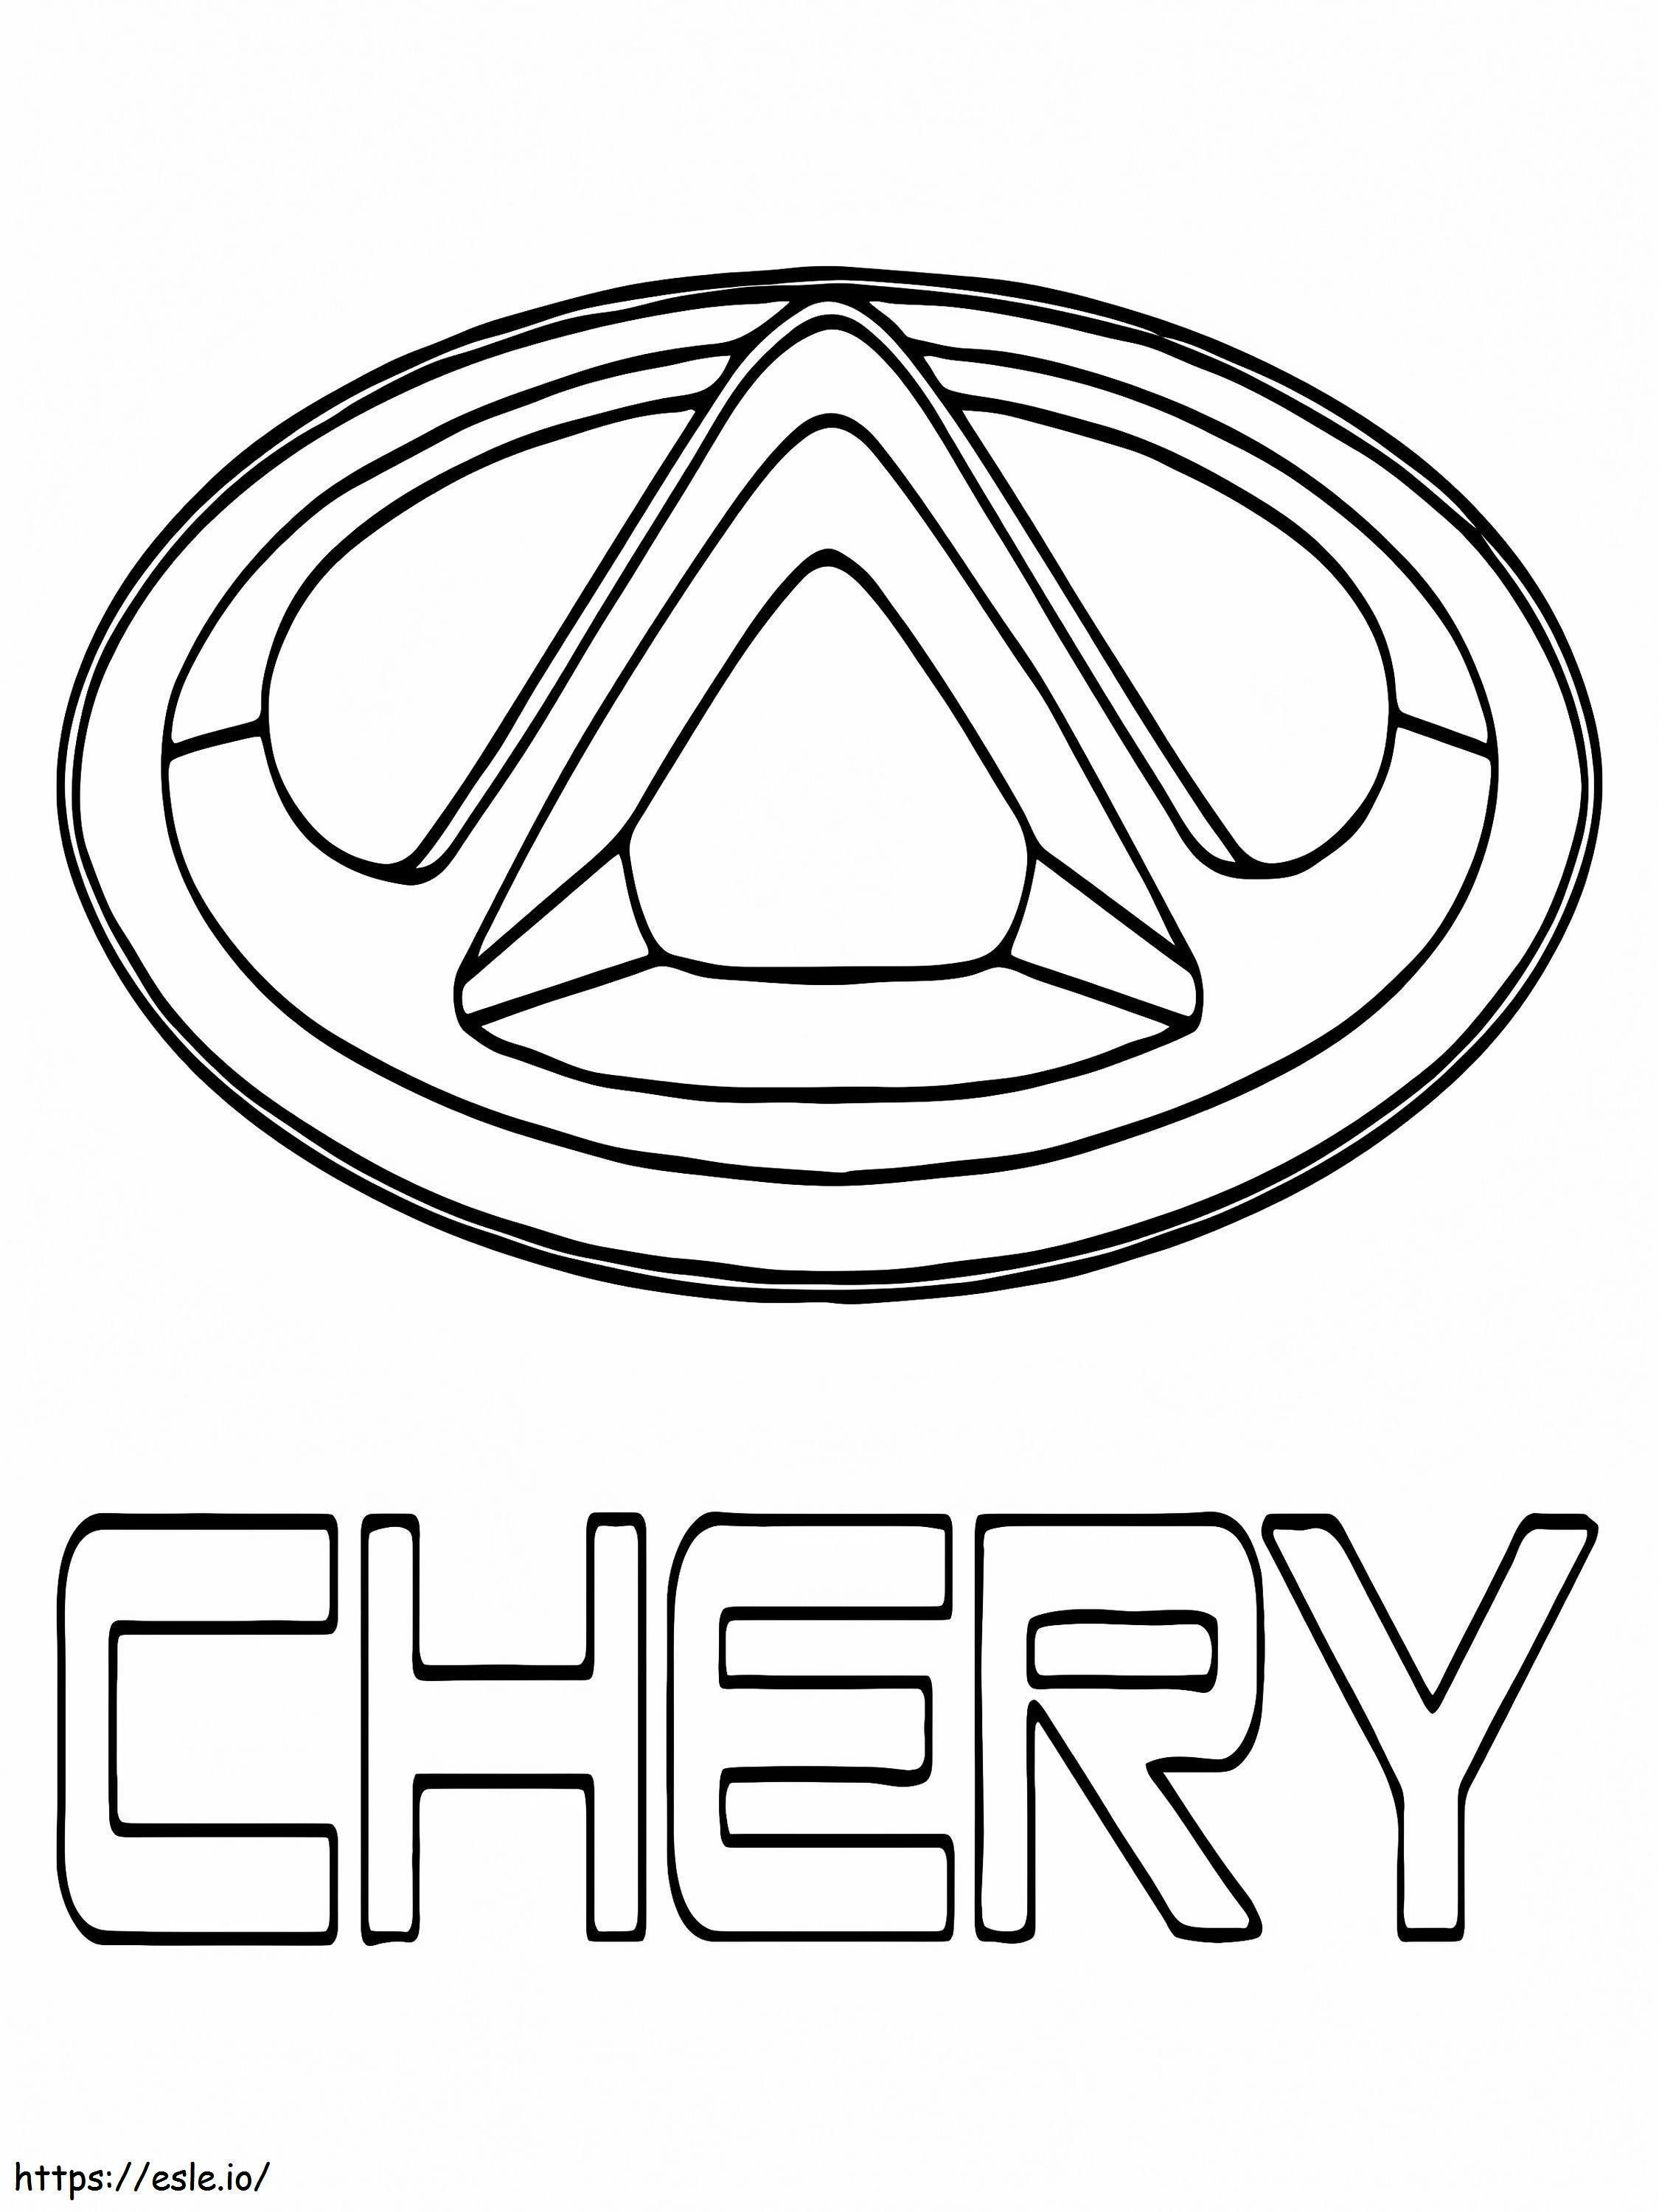 Chery Car Logo coloring page